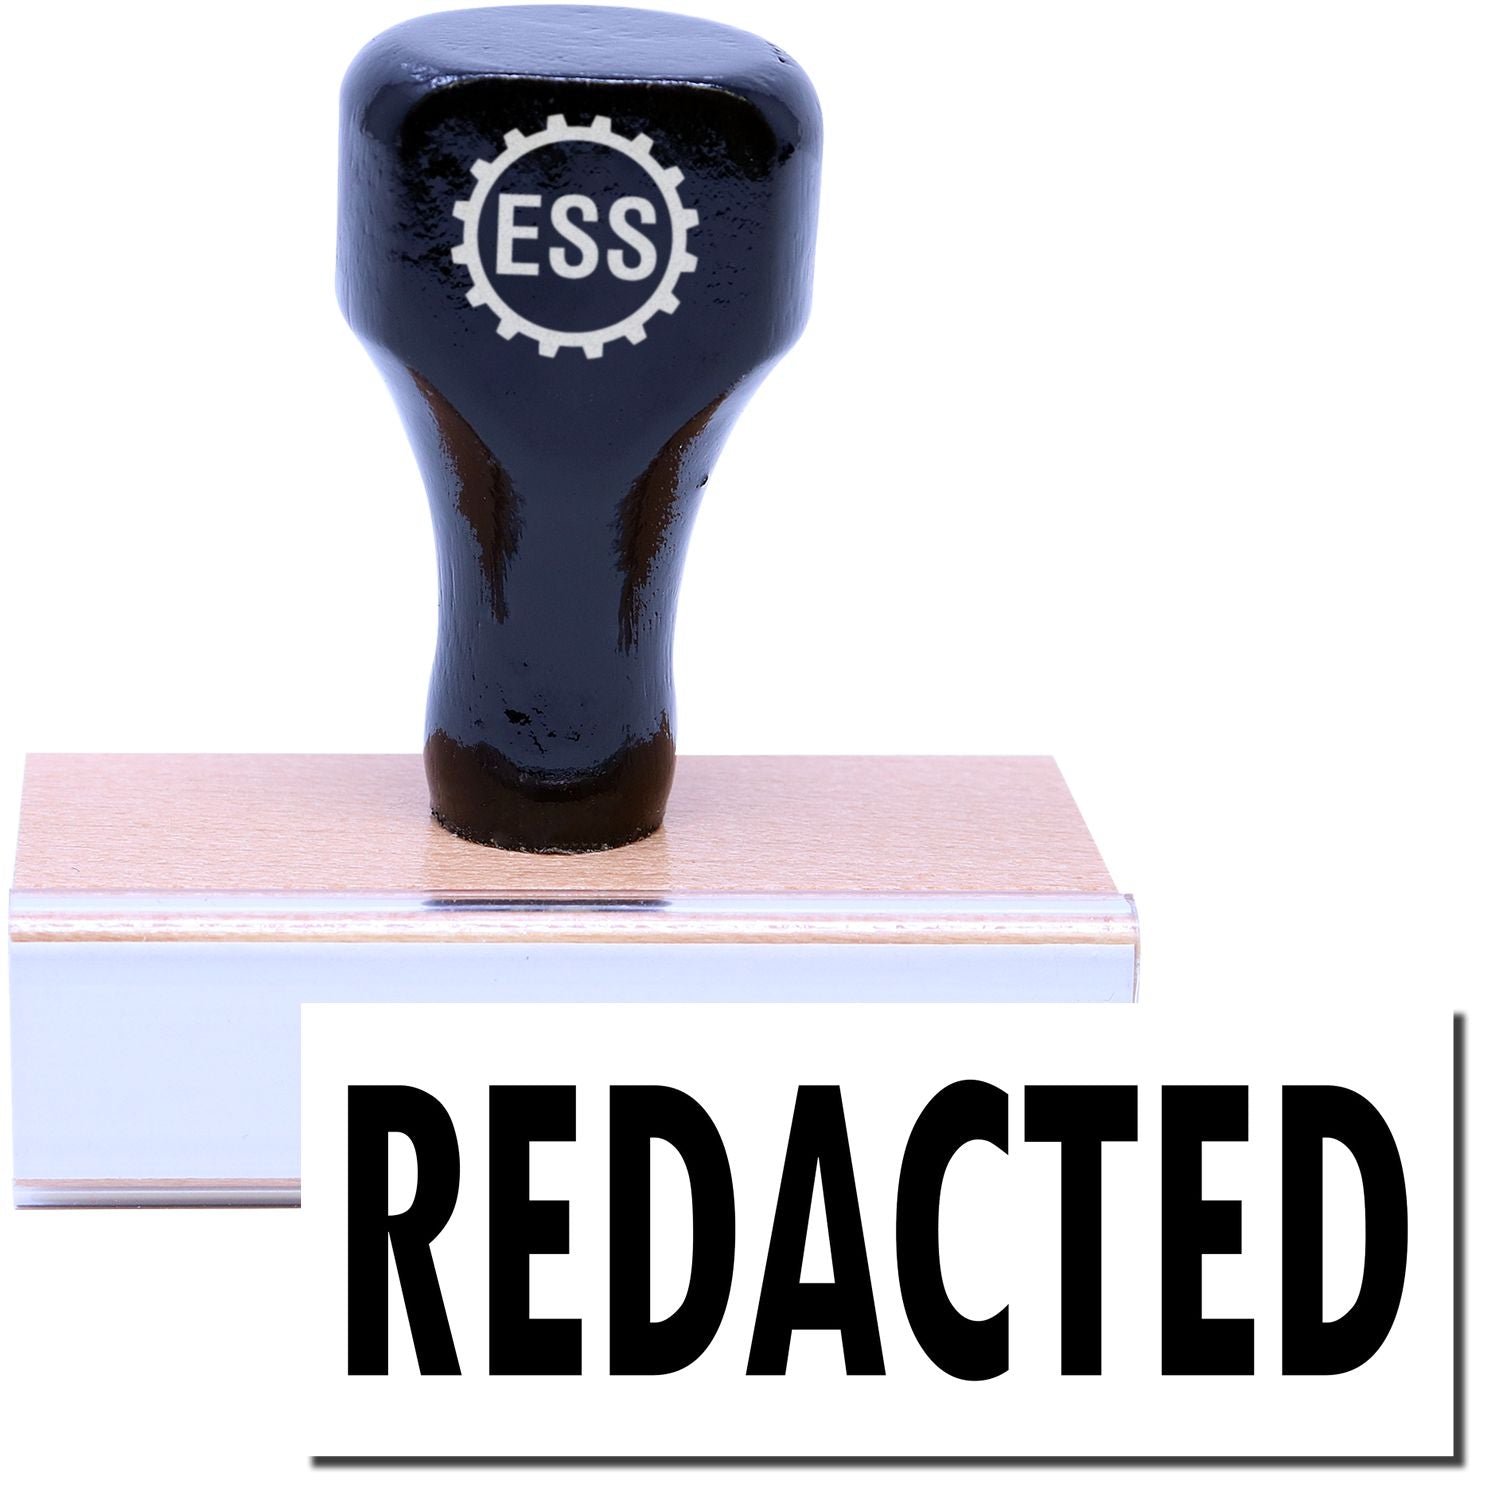 A stock office rubber stamp with a stamped image showing how the text "REDACTED" in a large font is displayed after stamping.